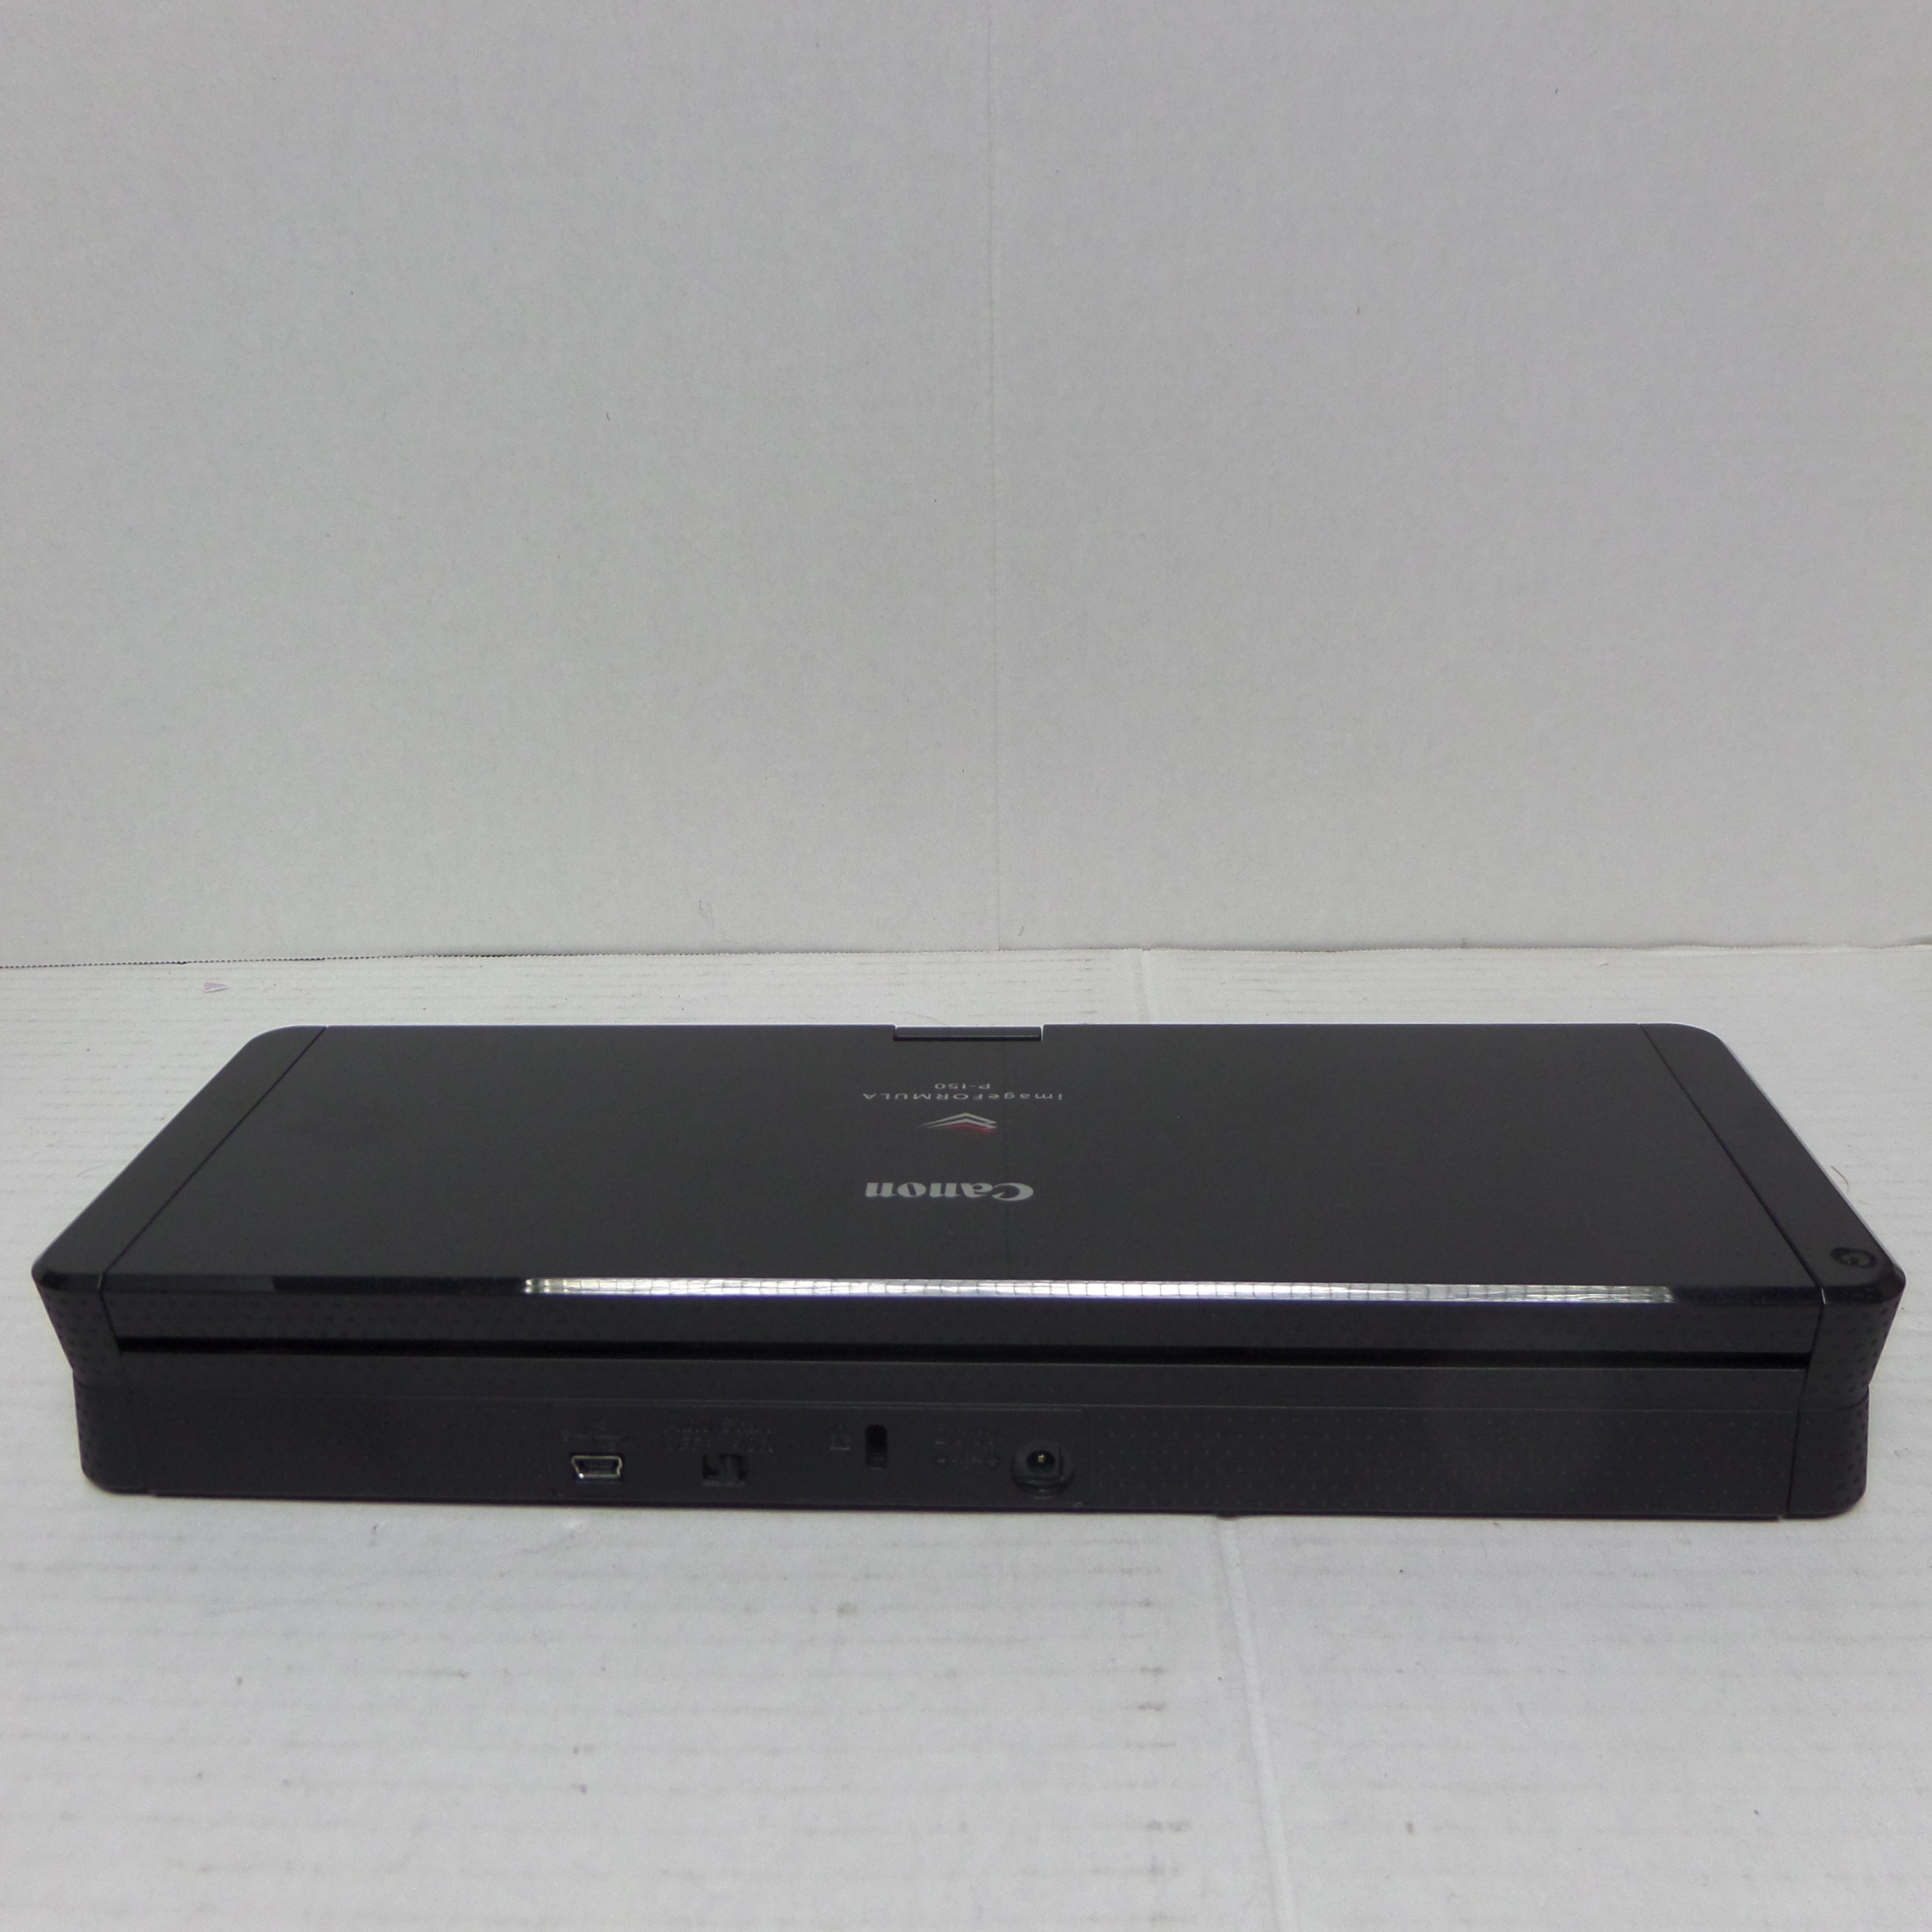 canon p 150 scanner driver download for mac